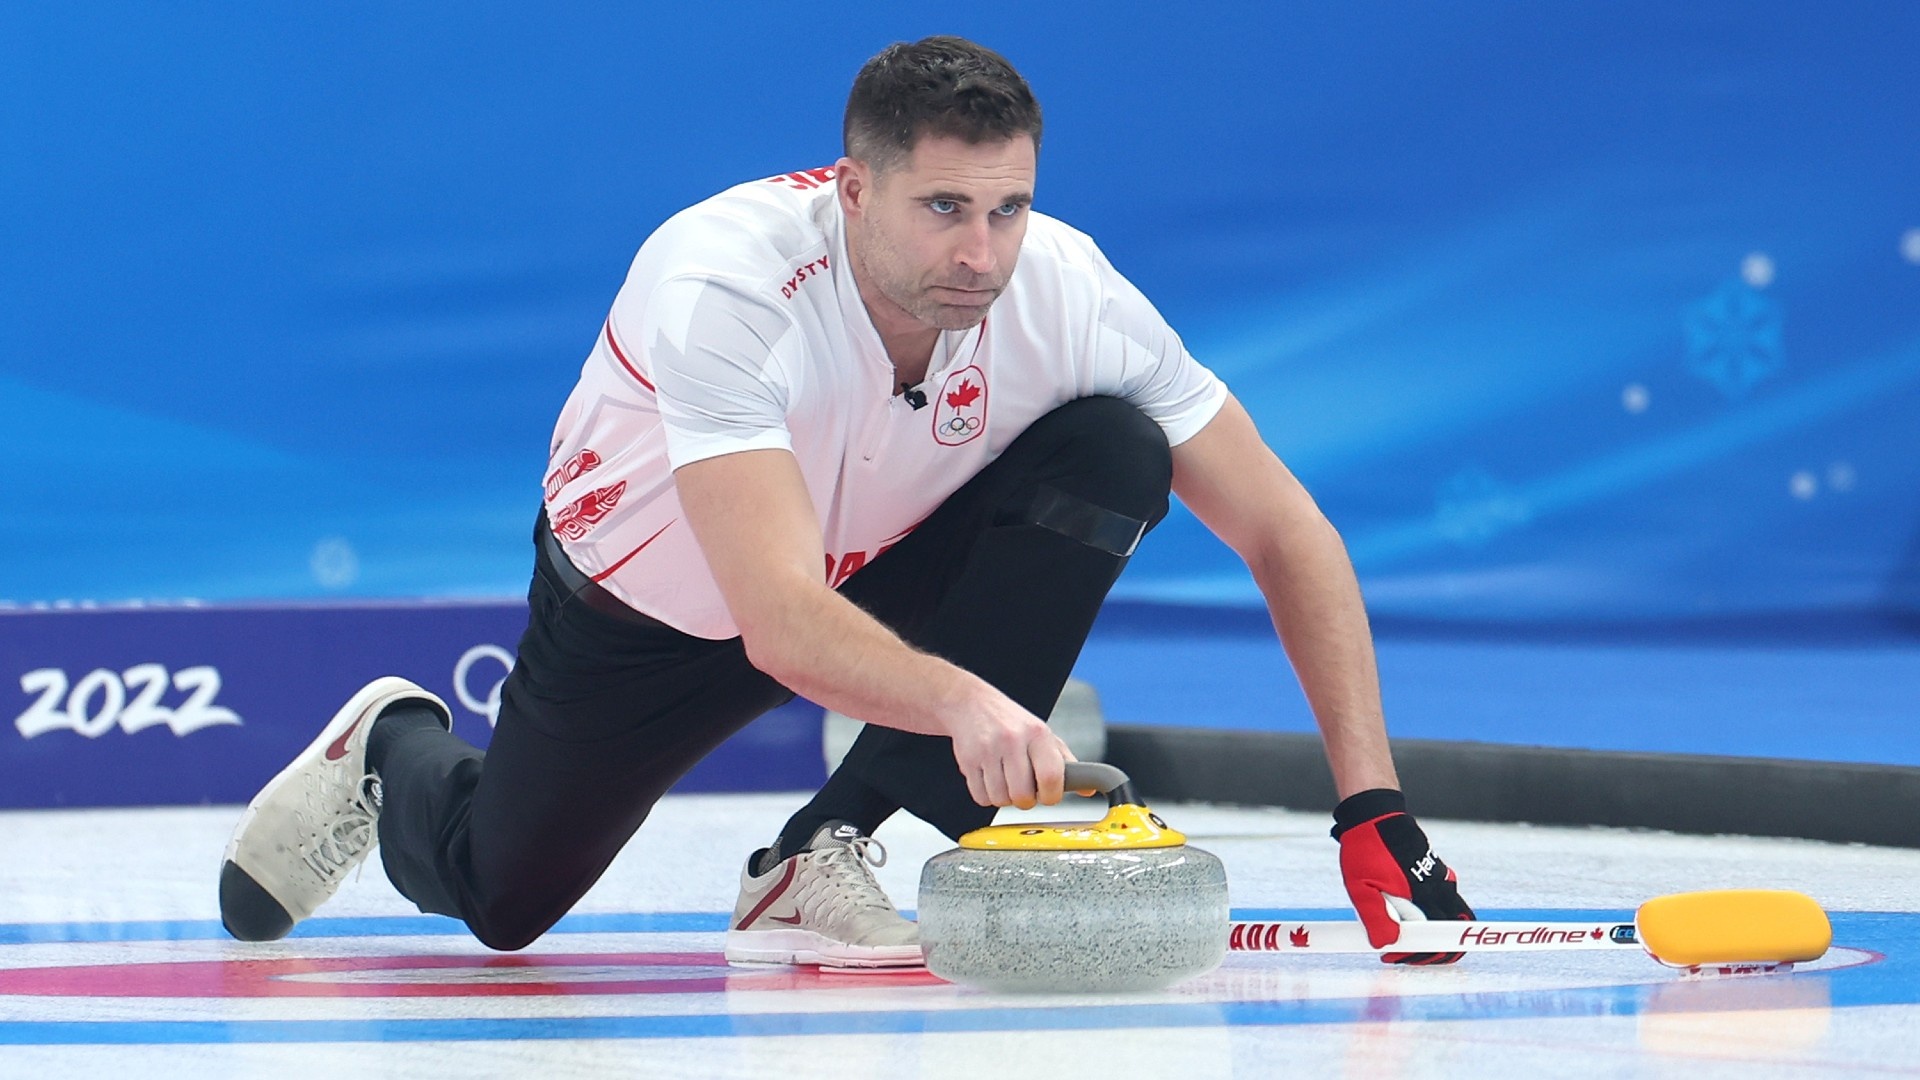 Curling: John Morris, A Canadian curler, A two-time Olympic gold medalist. 1920x1080 Full HD Wallpaper.